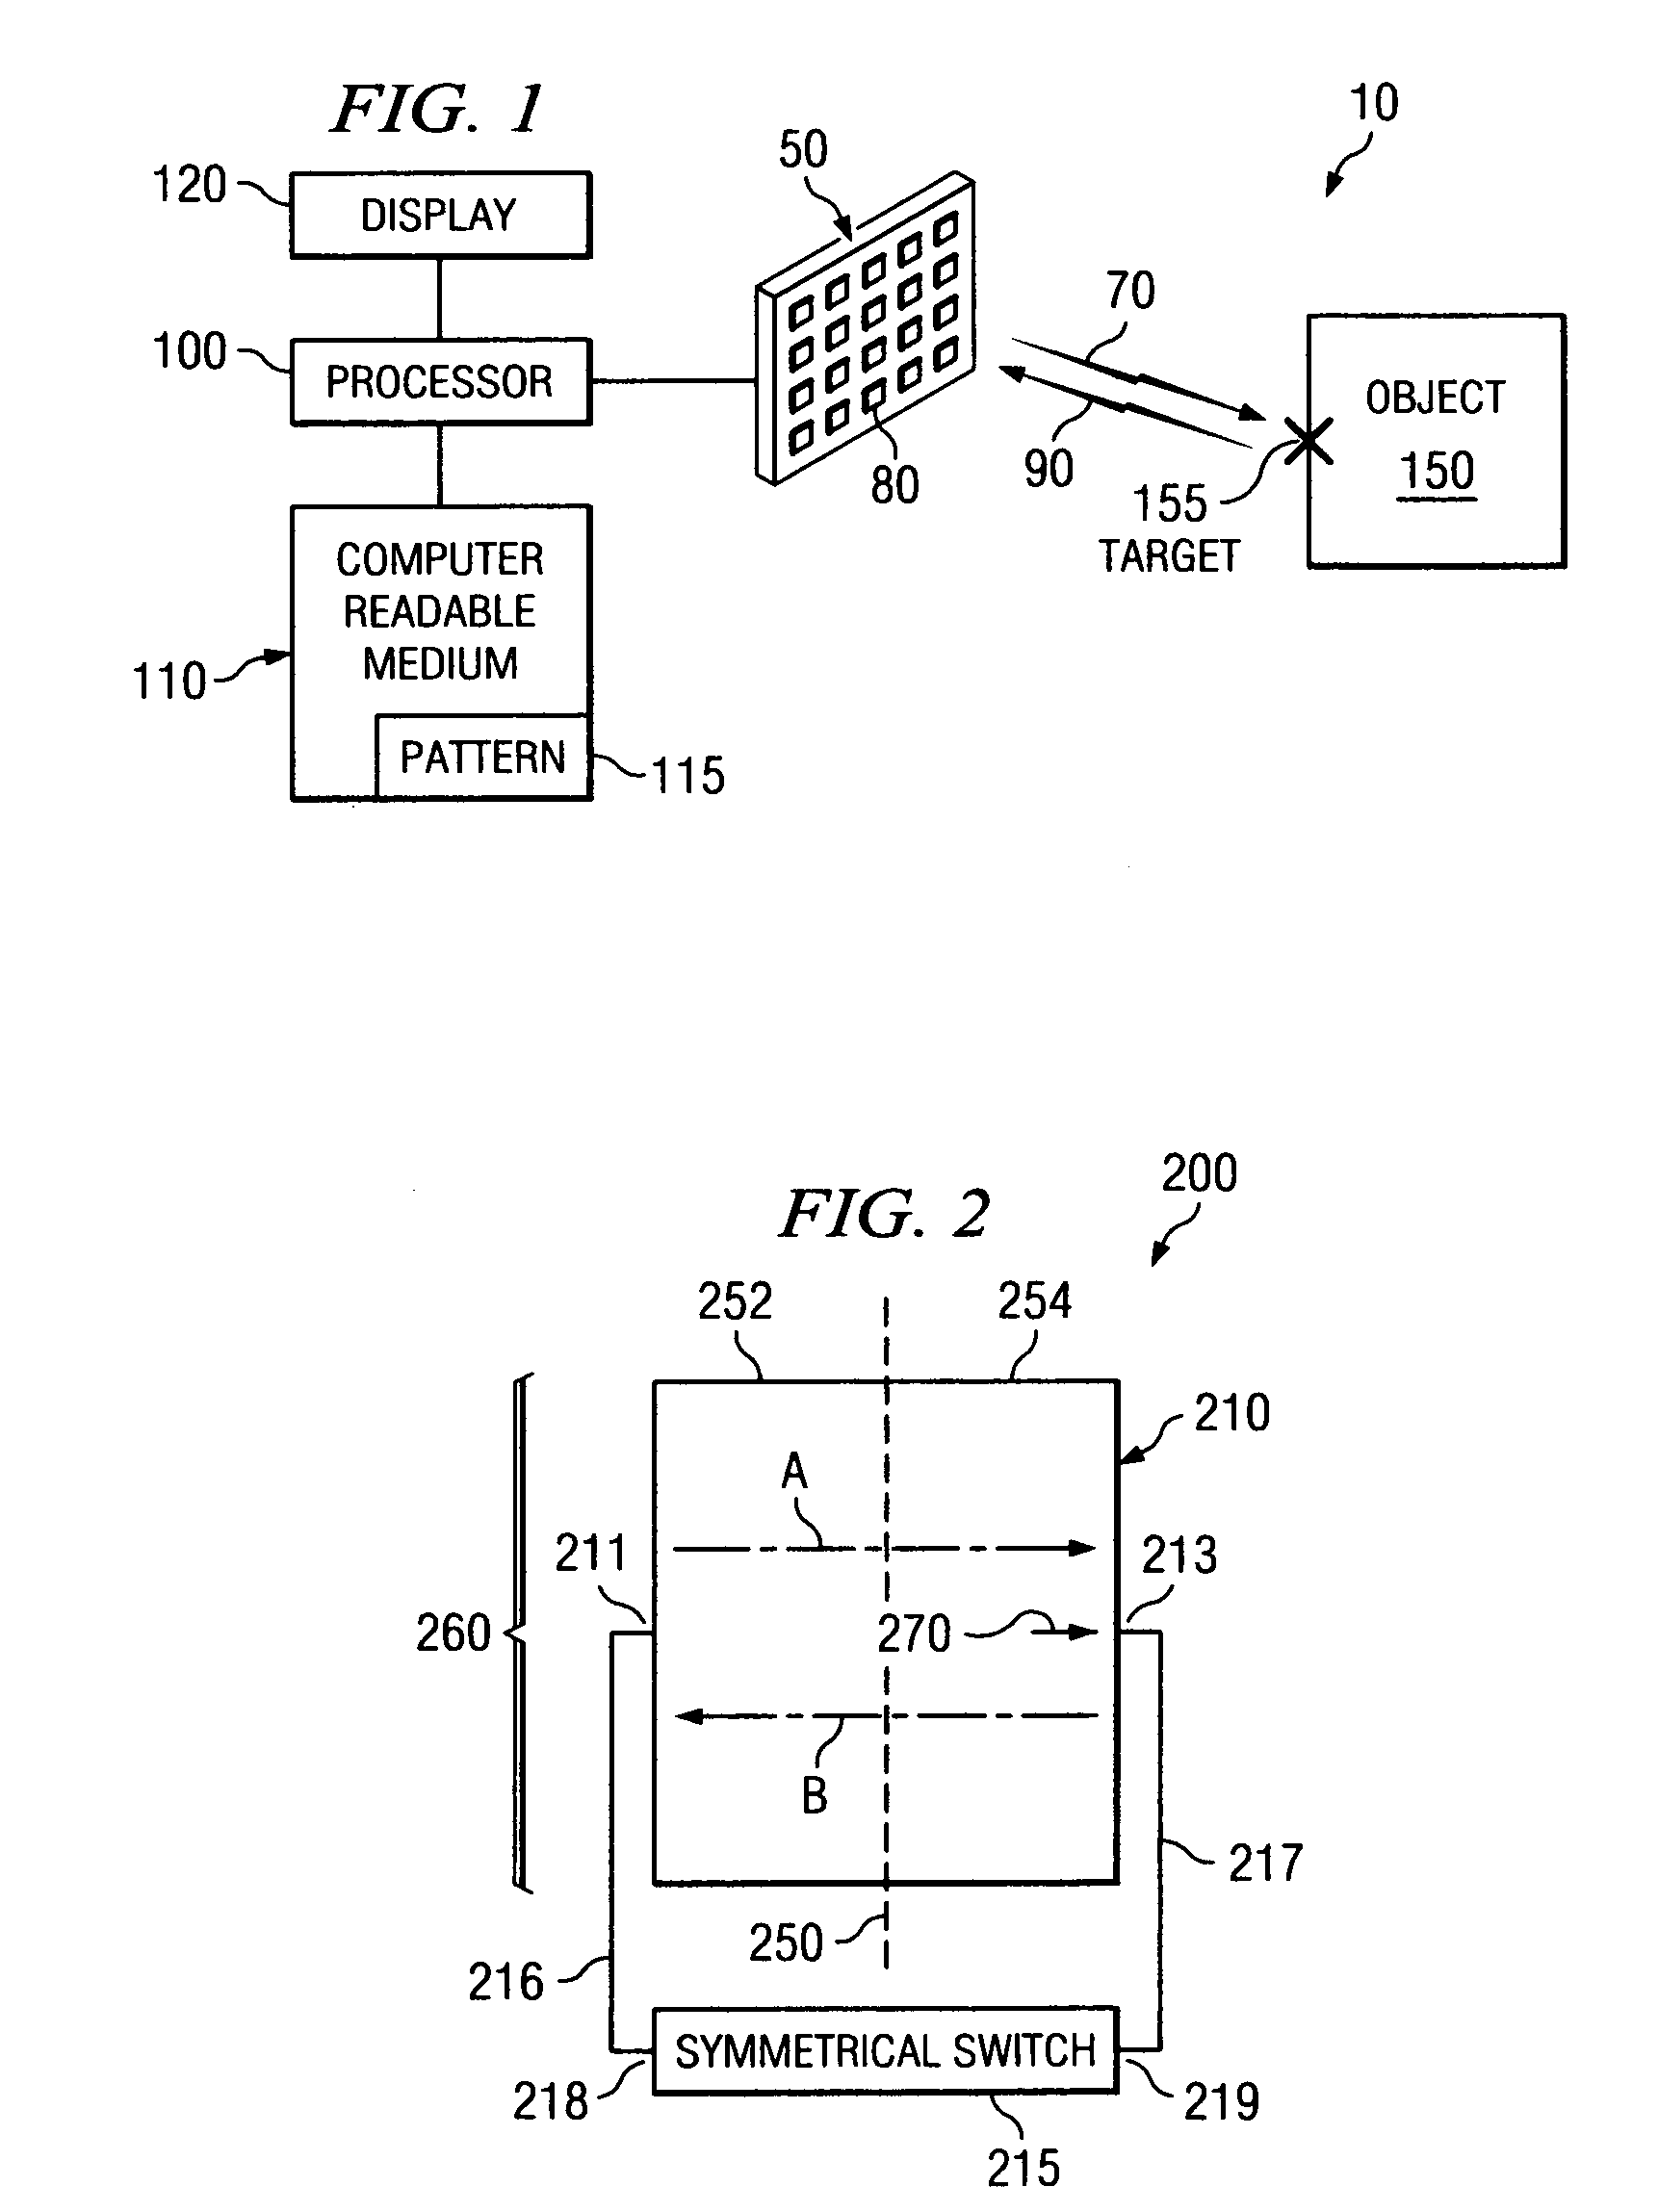 System and method for pattern design in microwave programmable arrays